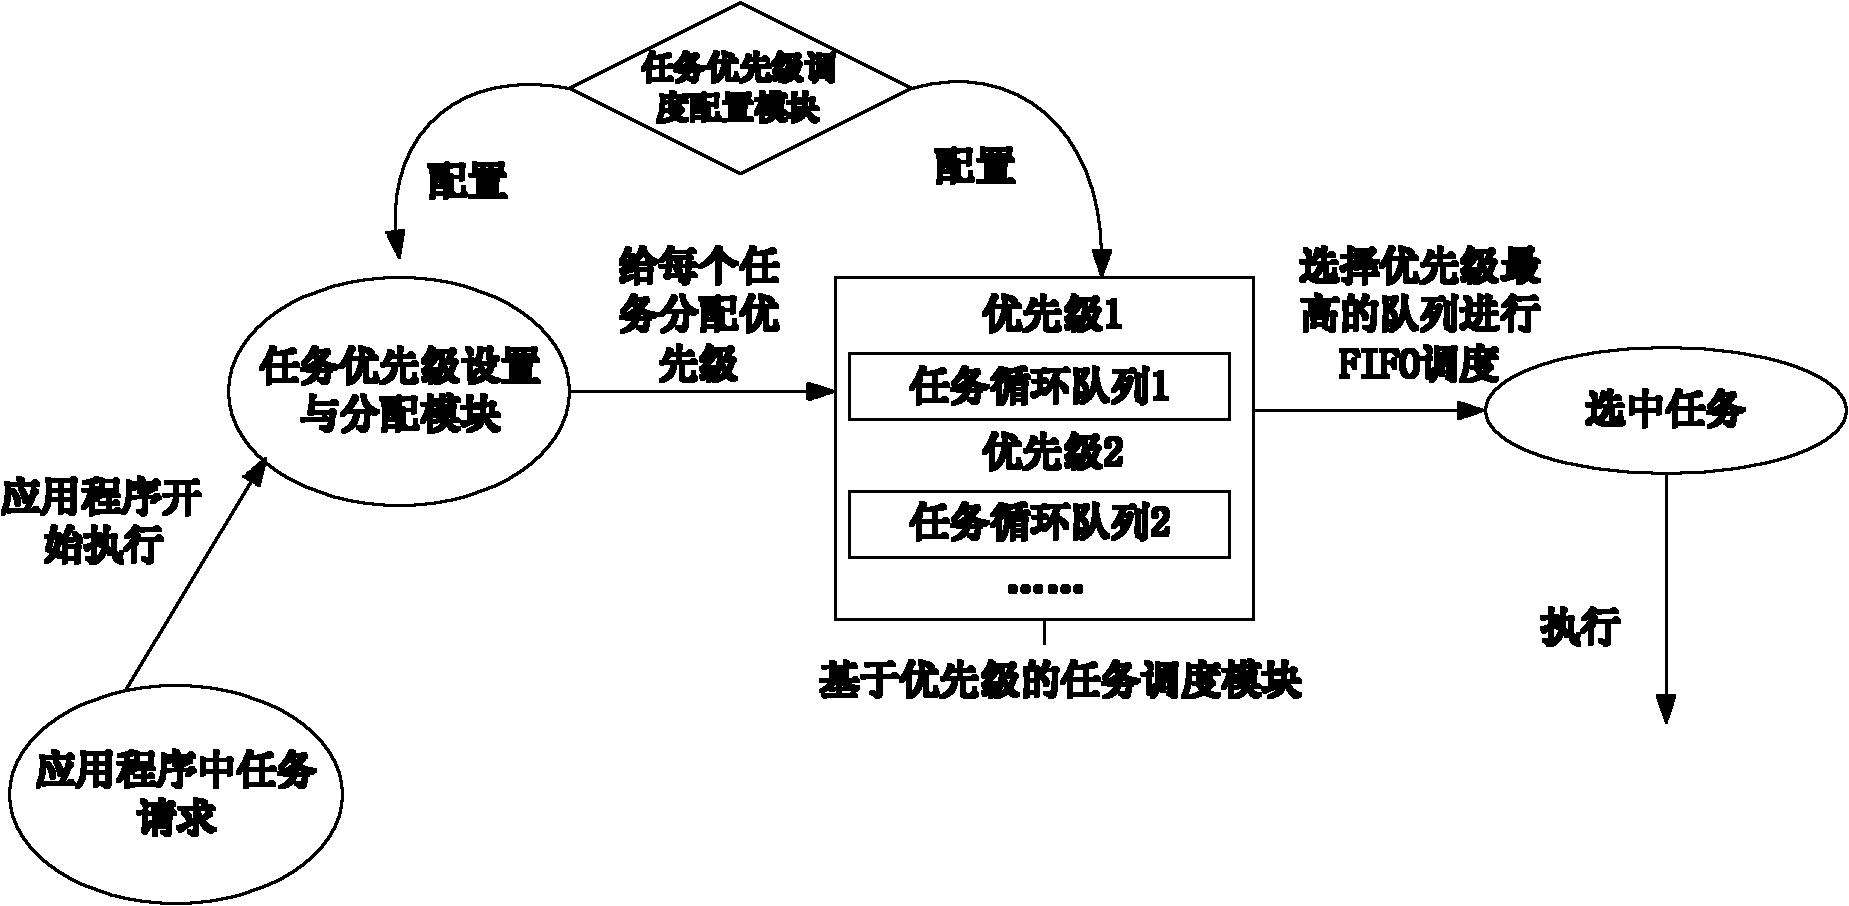 Sensor network embedded operation system based on priority scheduling